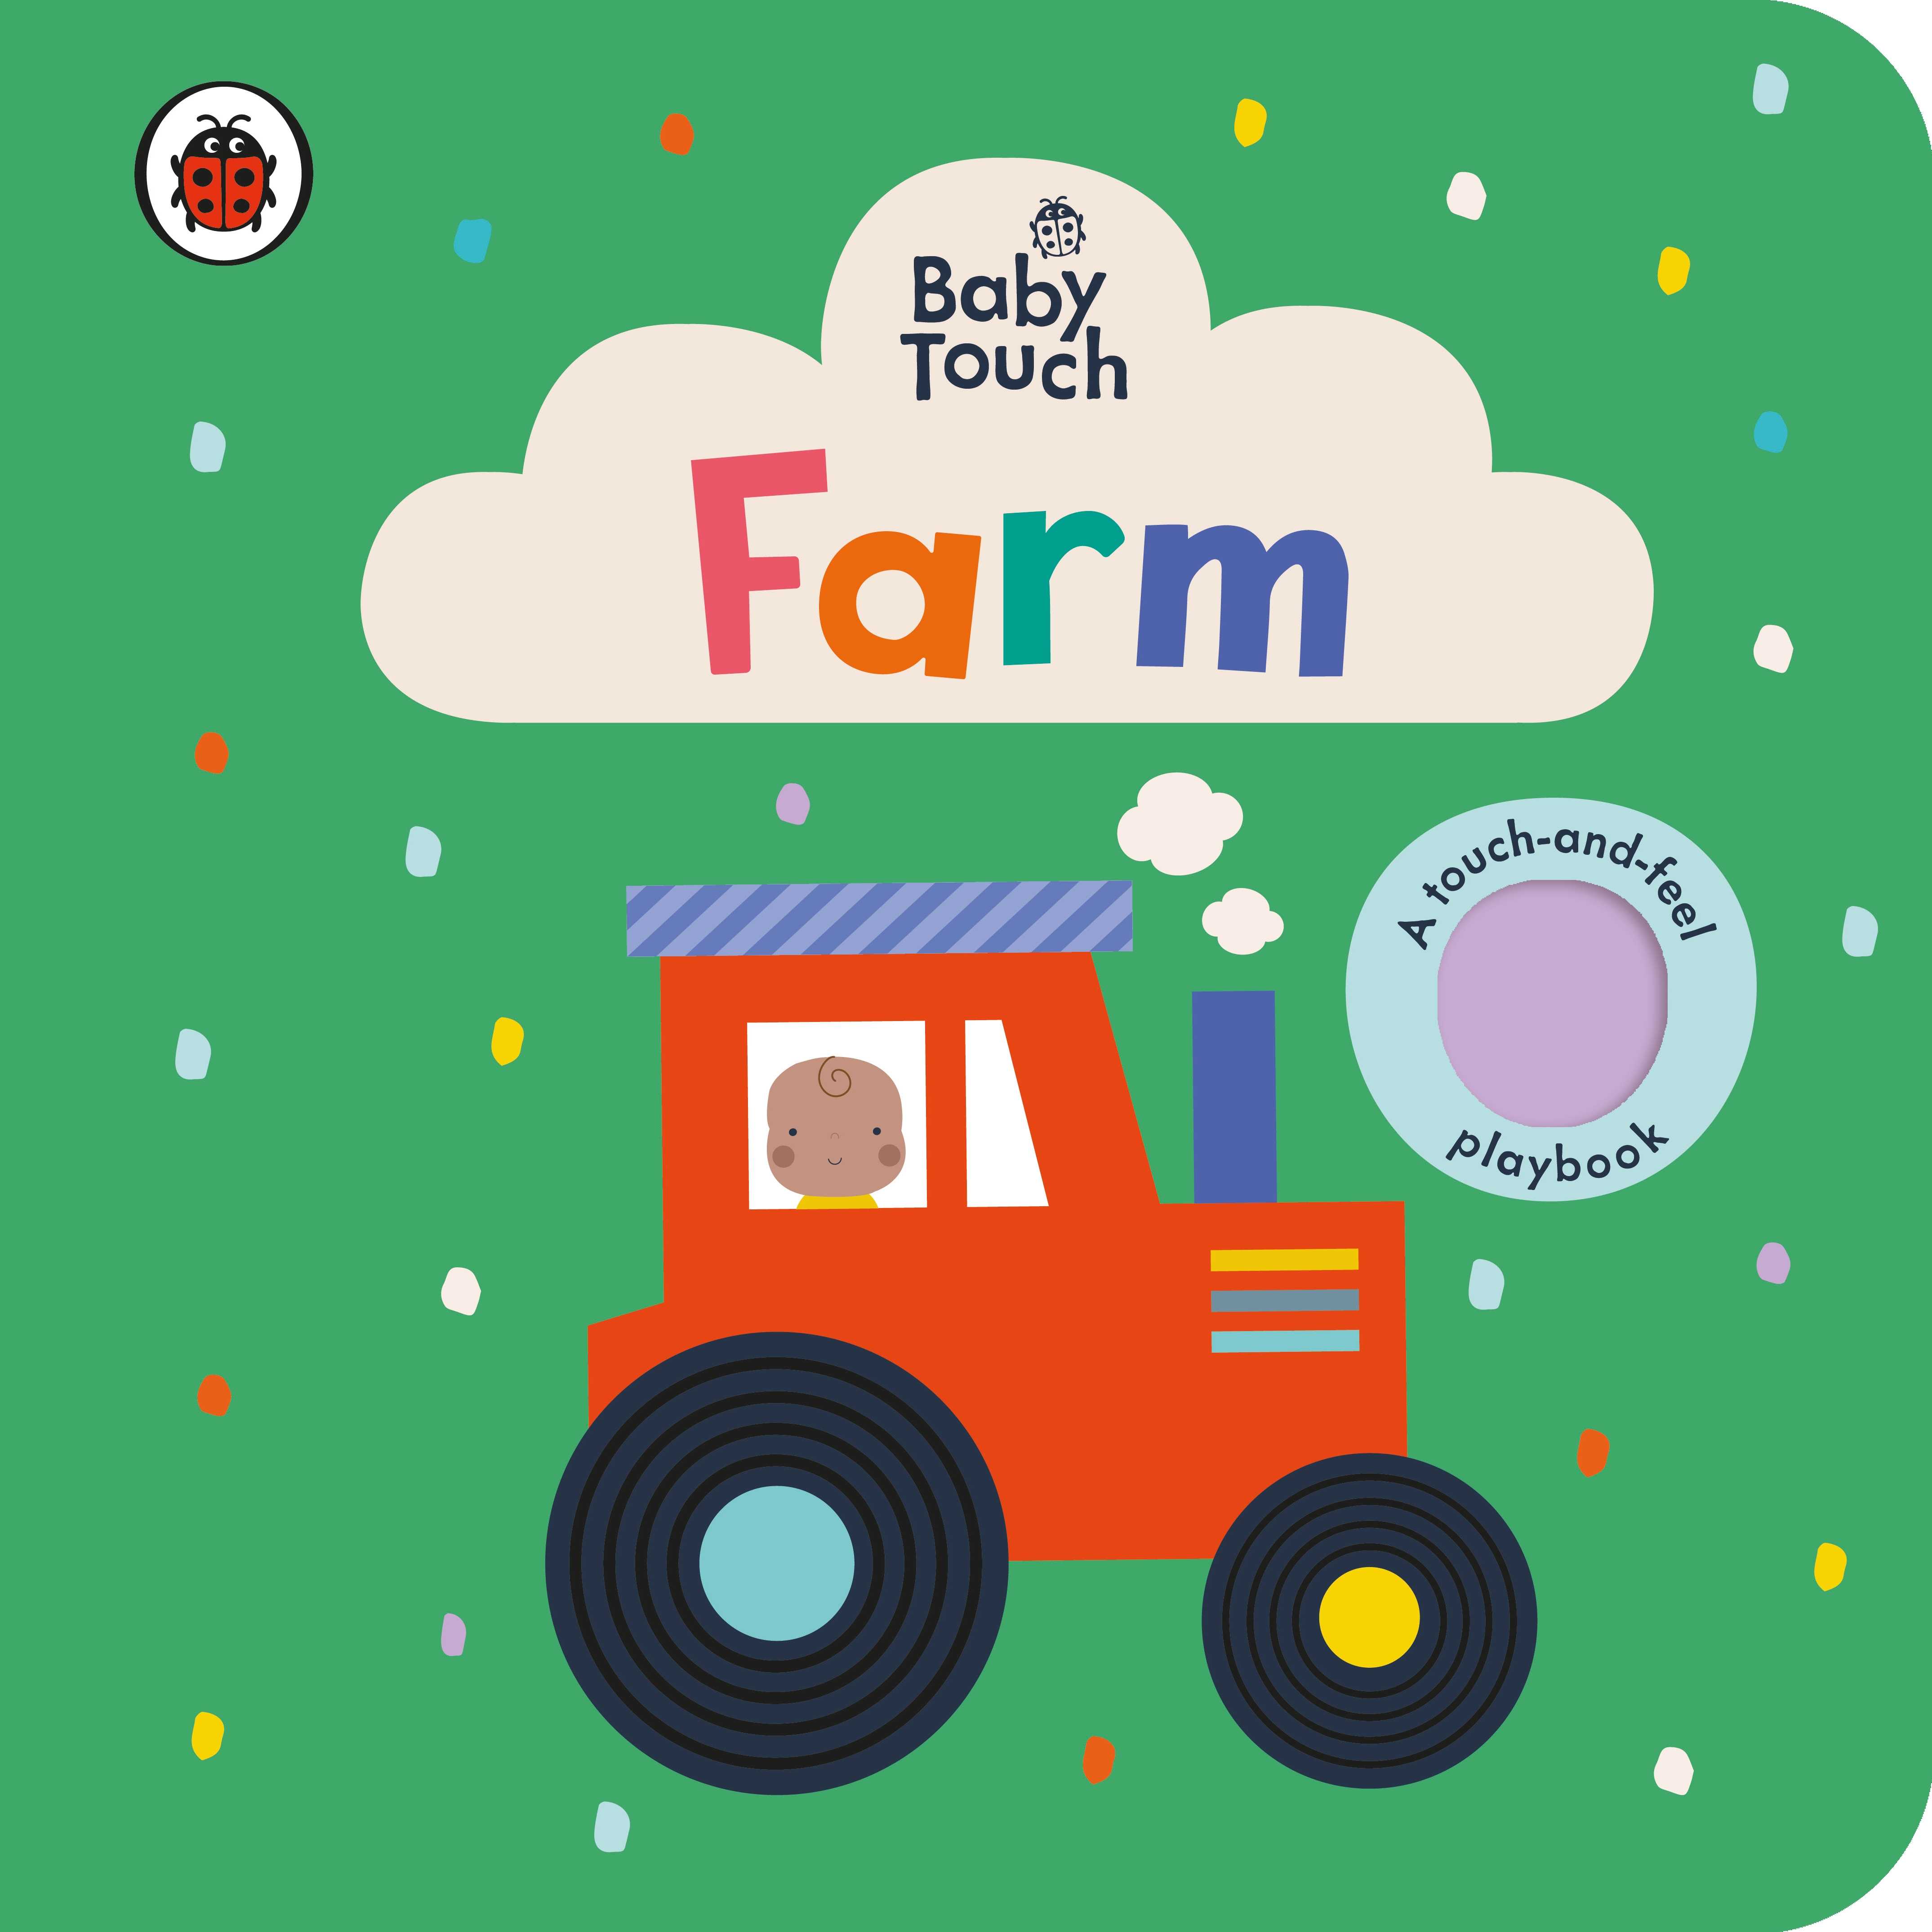 Farm (Baby Touch)